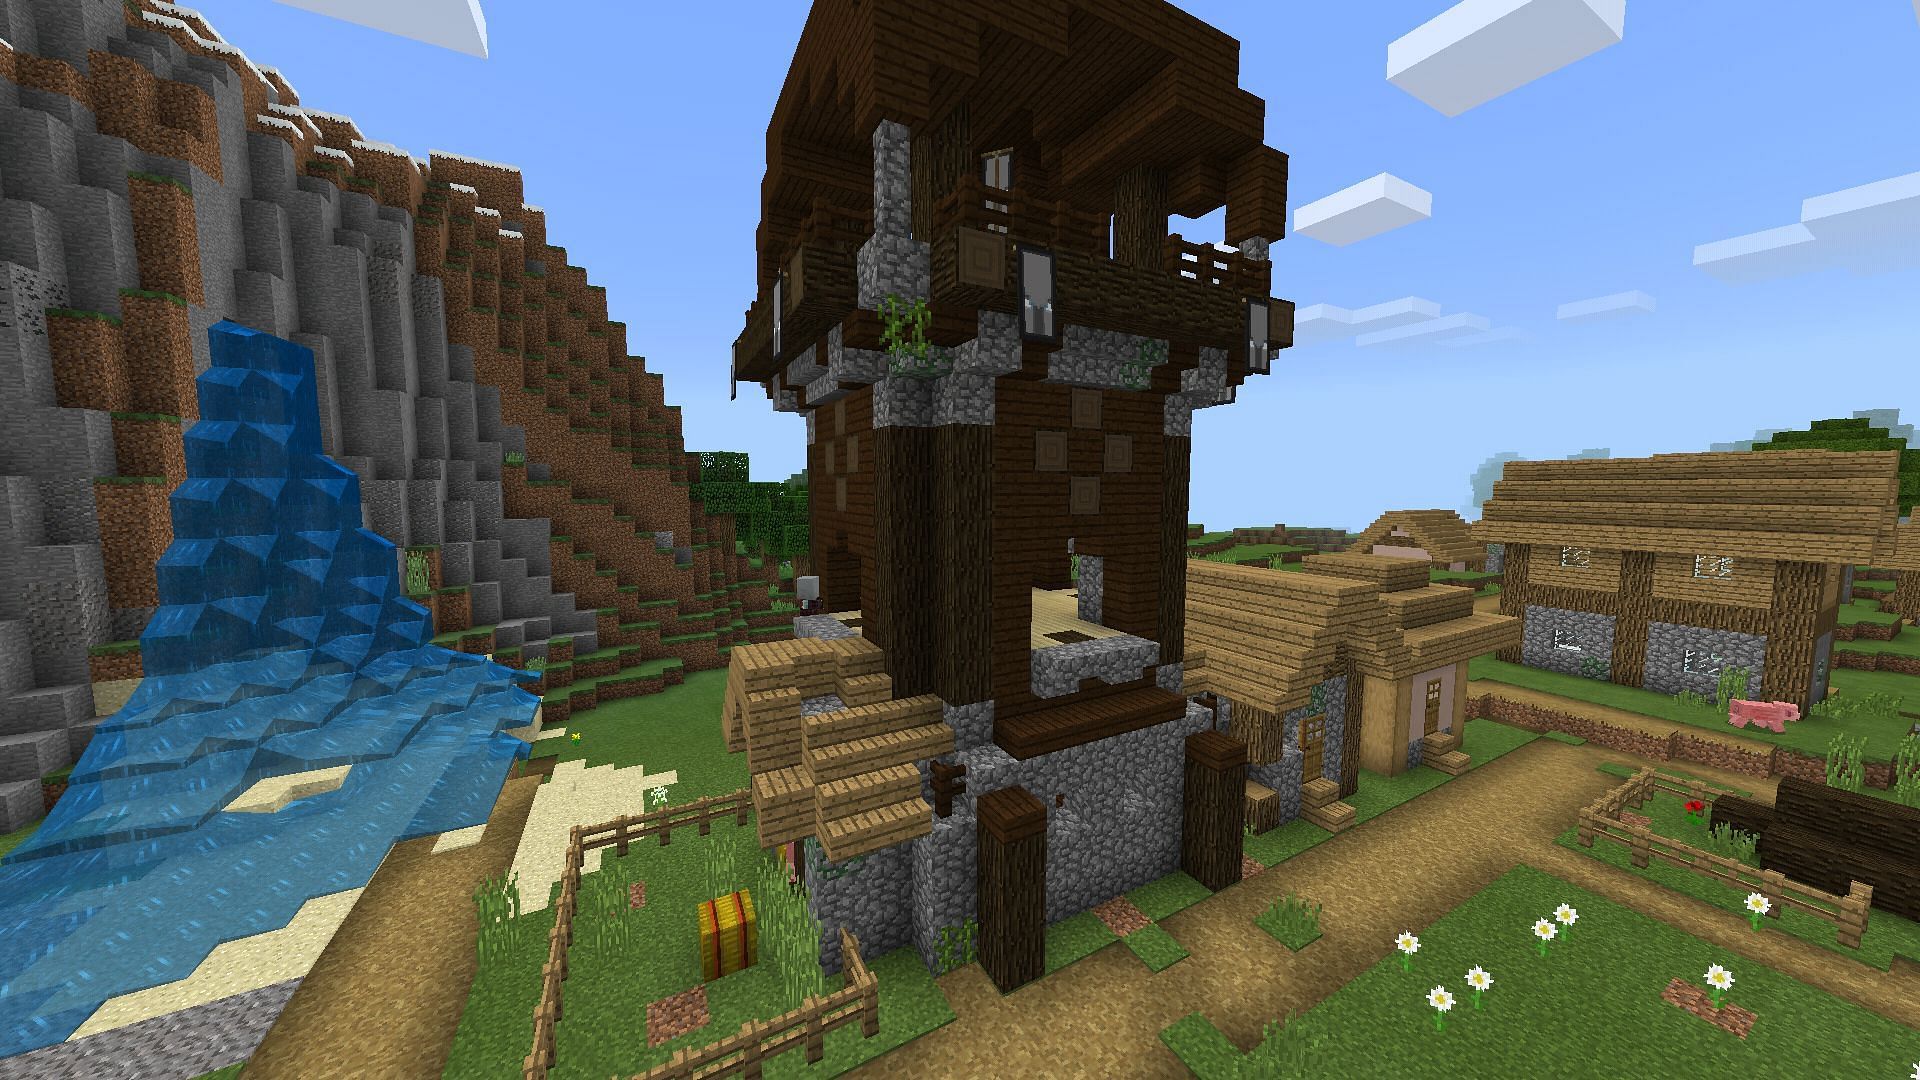 A pillager outpost spawned in the middle of a village (Image via Minecraft)